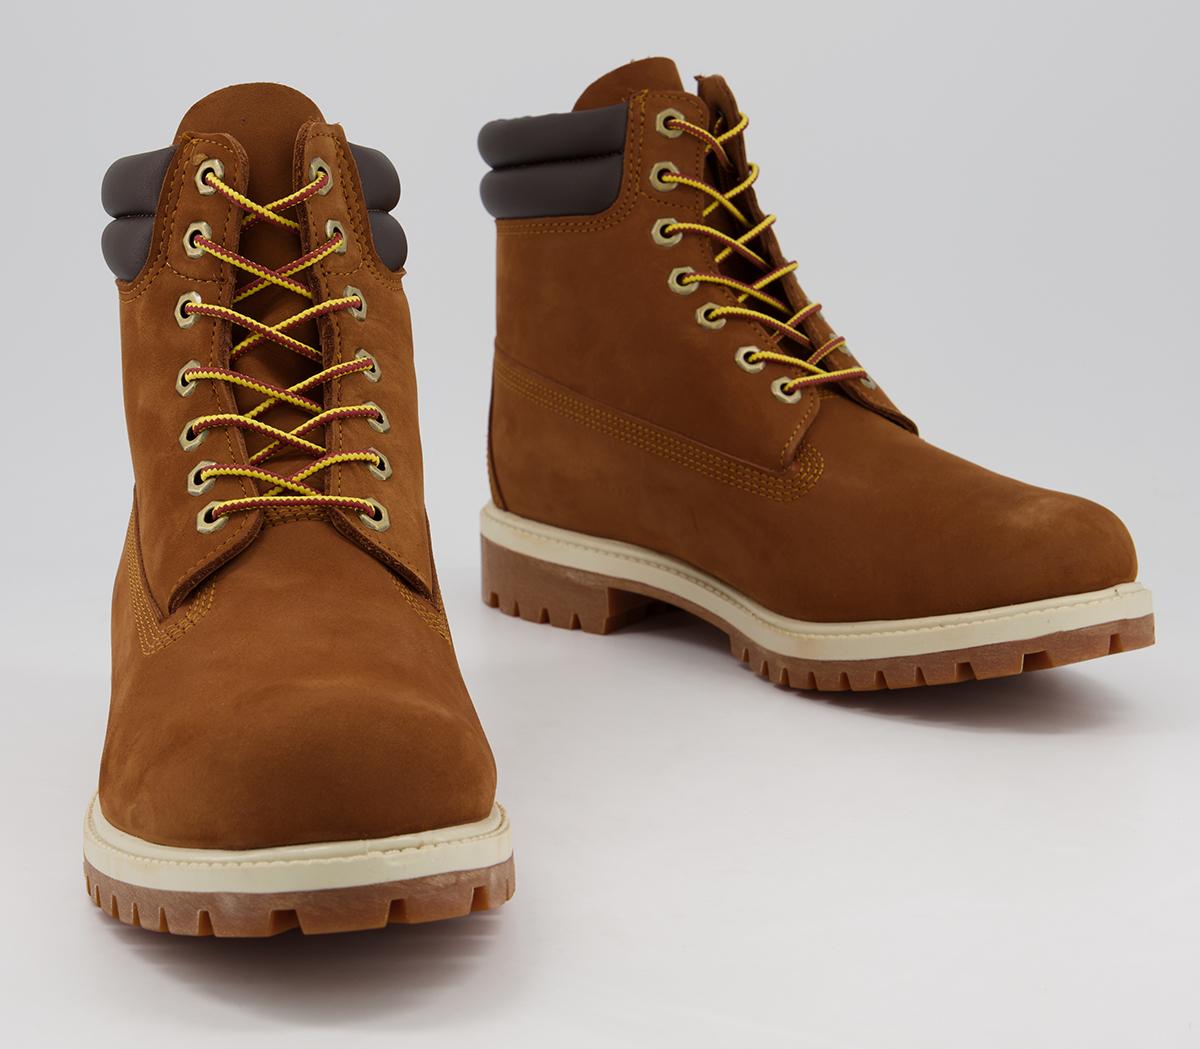 Timberland 6 Inch Double Collar Boots Medium Brown - Boots